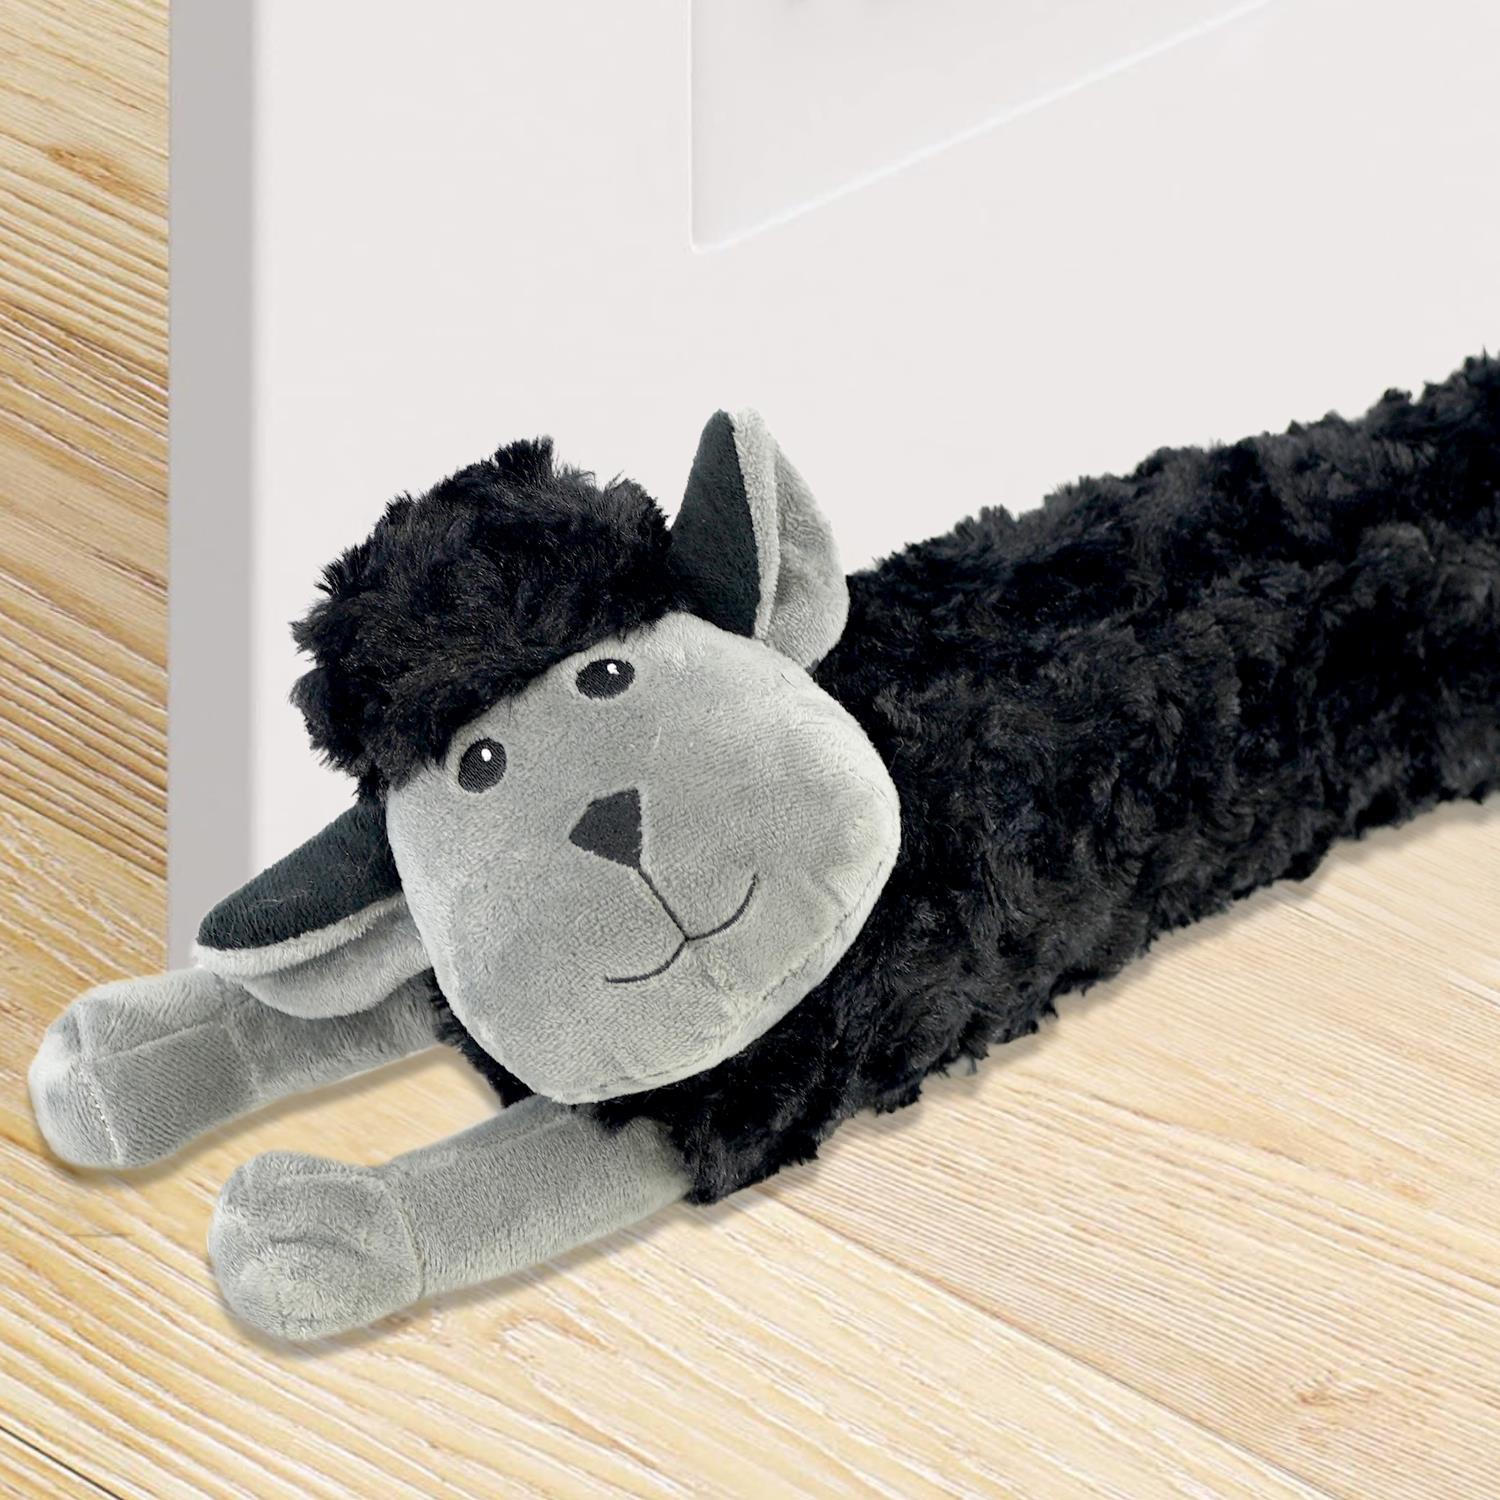 Novelty Black Sheep Excluder by The Magic Toy Shop - The Magic Toy Shop